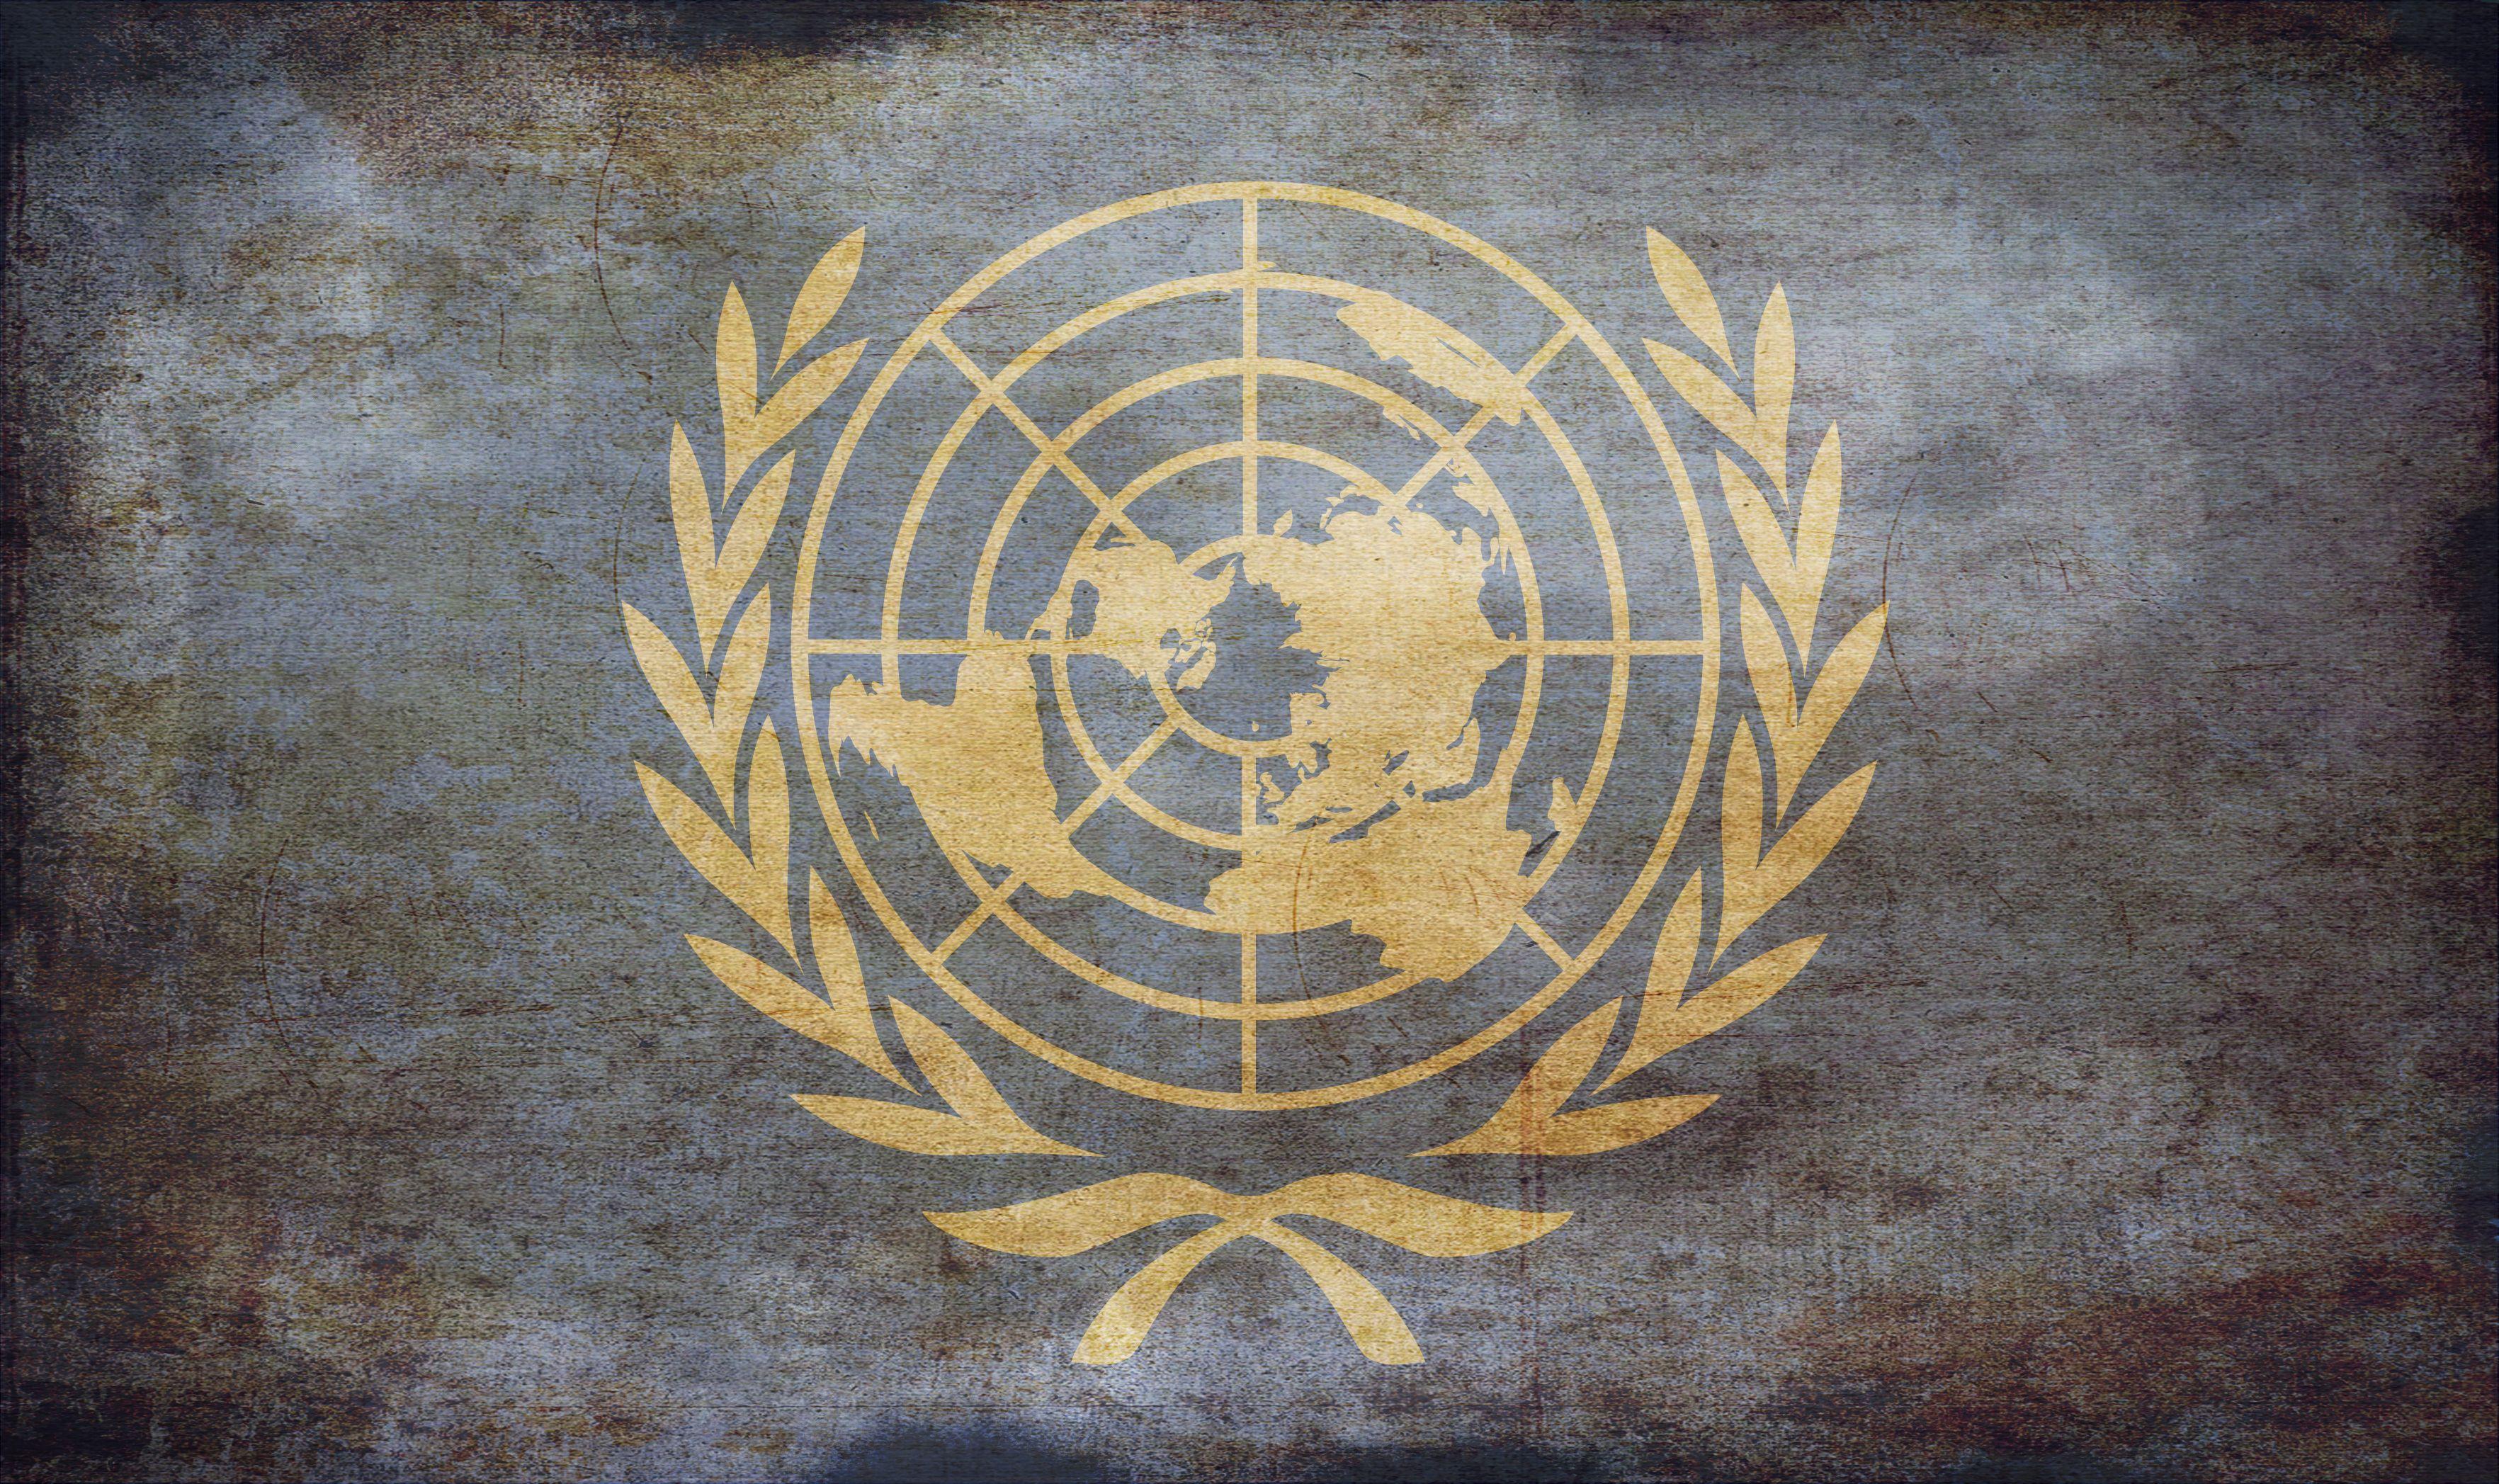 United Nations Wallpapers Top Free United Nations Backgrounds